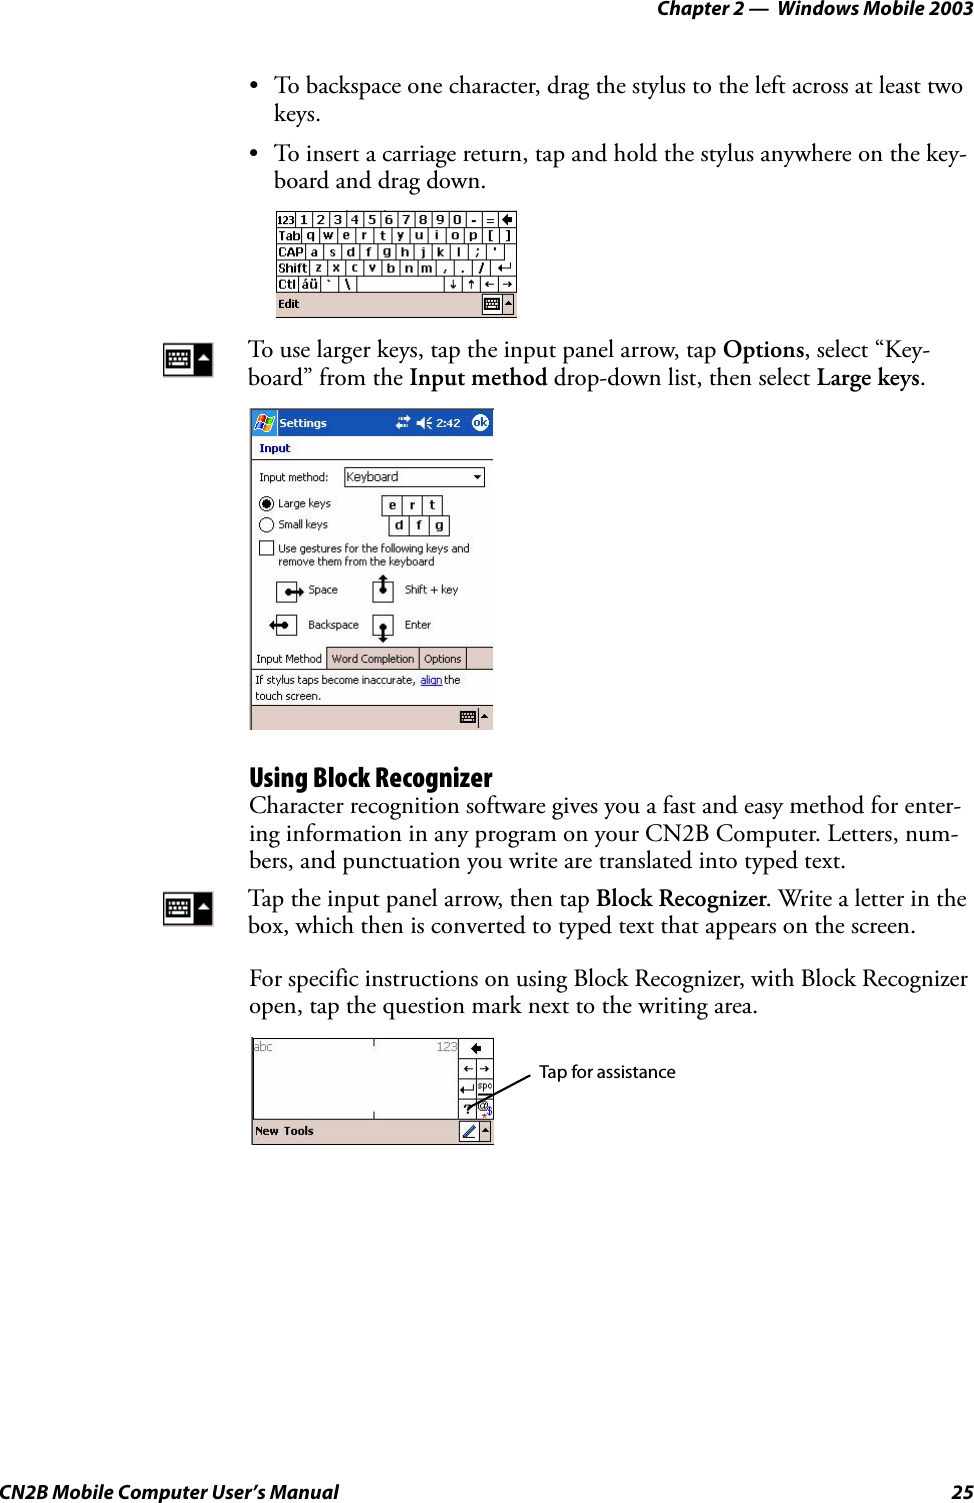 Chapter 2 —  Windows Mobile 2003CN2B Mobile Computer User’s Manual 25• To backspace one character, drag the stylus to the left across at least two keys.• To insert a carriage return, tap and hold the stylus anywhere on the key-board and drag down.Using Block RecognizerCharacter recognition software gives you a fast and easy method for enter-ing information in any program on your CN2B Computer. Letters, num-bers, and punctuation you write are translated into typed text.For specific instructions on using Block Recognizer, with Block Recognizer open, tap the question mark next to the writing area.To use larger keys, tap the input panel arrow, tap Options, select “Key-board” from the Input method drop-down list, then select Large keys.Tap the input panel arrow, then tap Block Recognizer. Write a letter in the box, which then is converted to typed text that appears on the screen.Tap for assistance